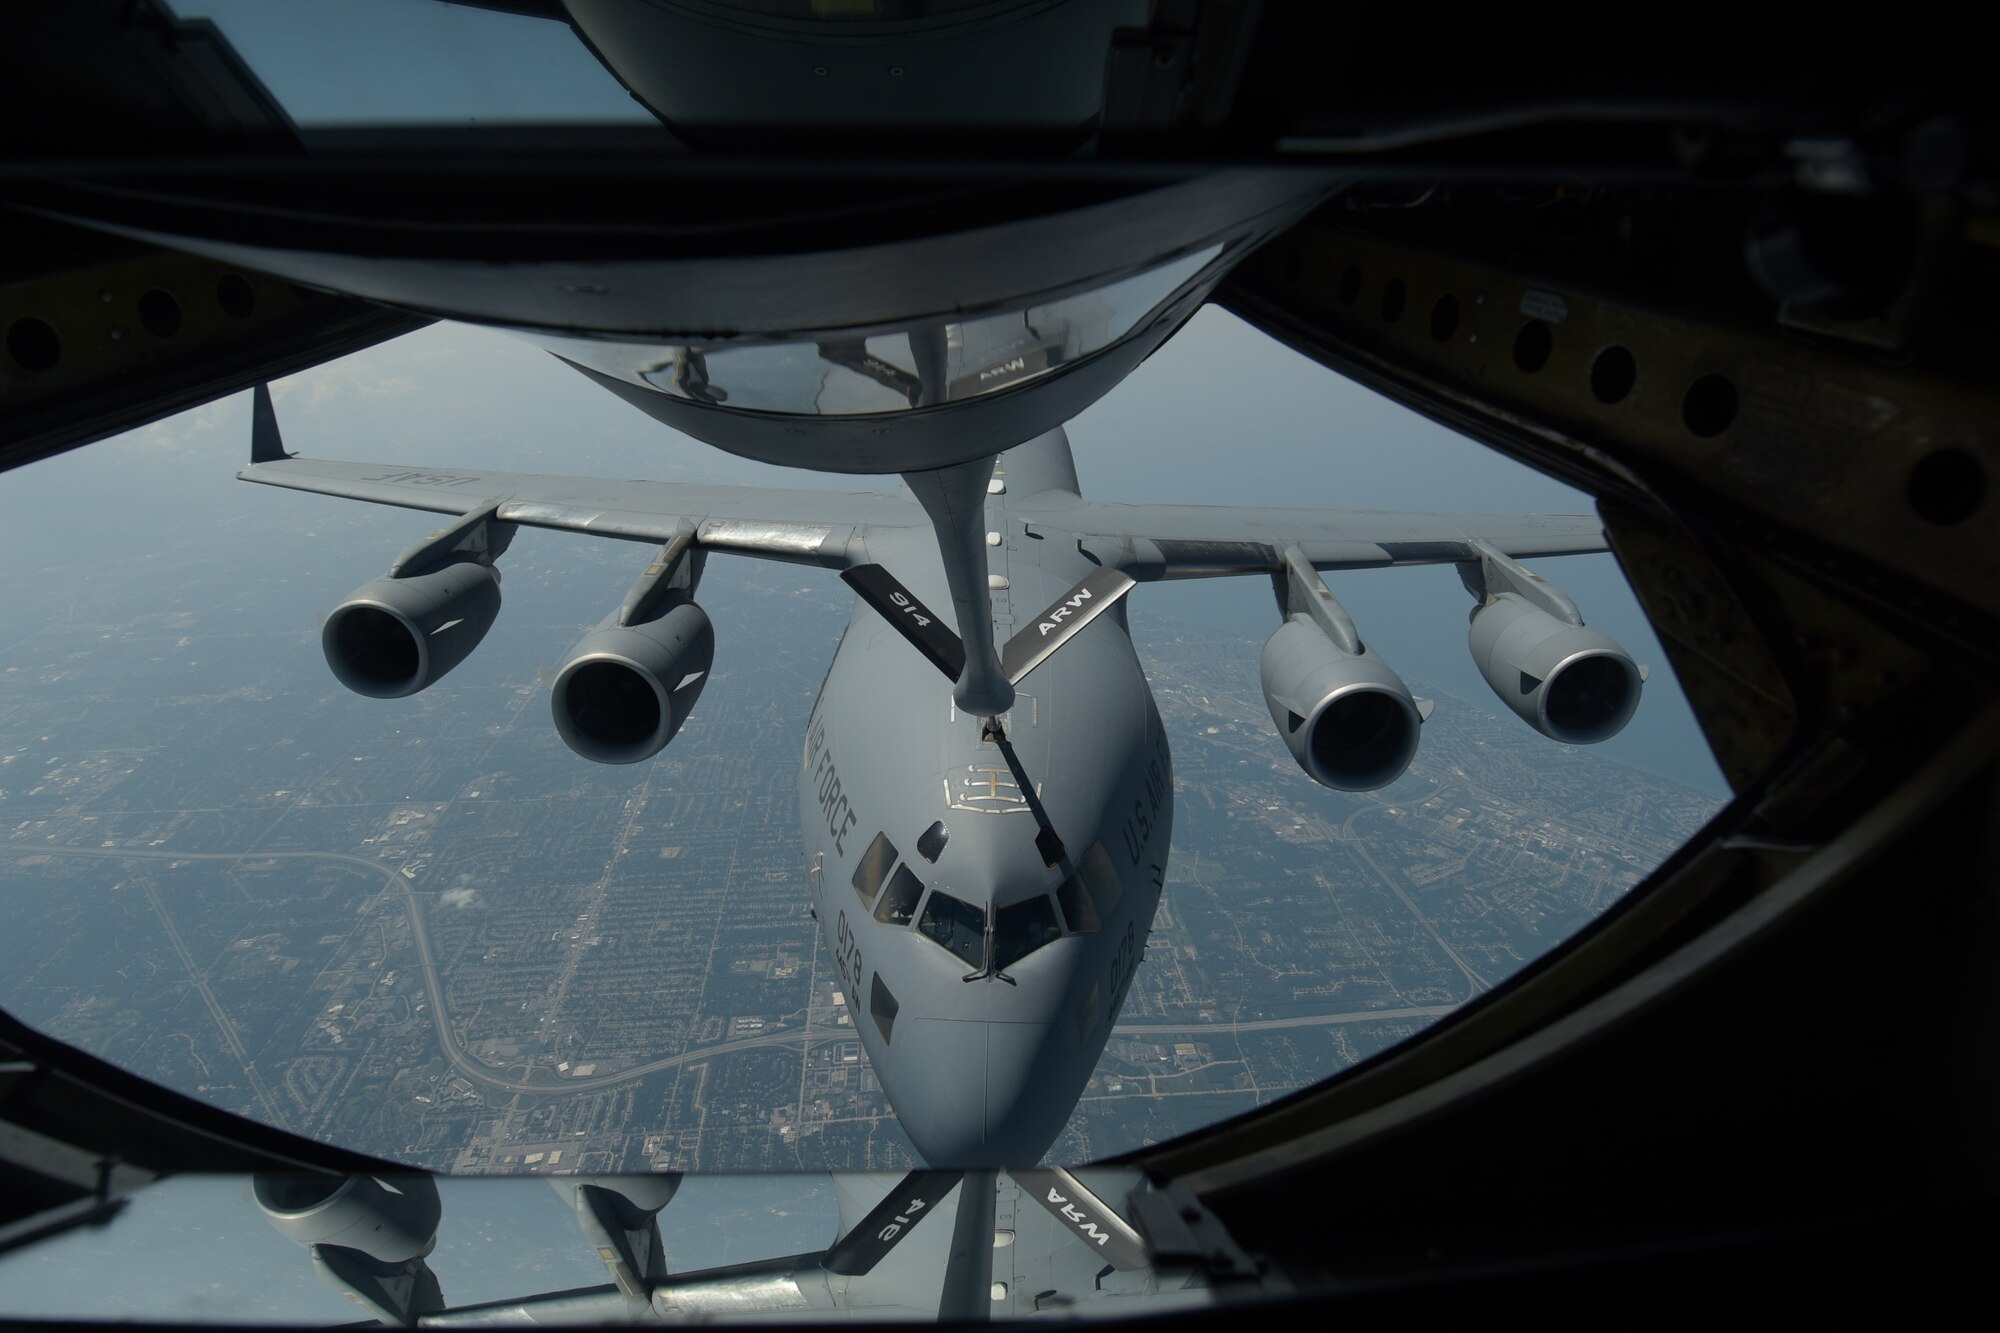 The 914th Air Refueling Wing's 328th Air Refueling Squadron continues to advance with their new mission with their KC-135 Stratotanker as they refuel a C-17 Globemaster III from the 445th Airlift Wing stationed at Wright Patterson Air Force Base.